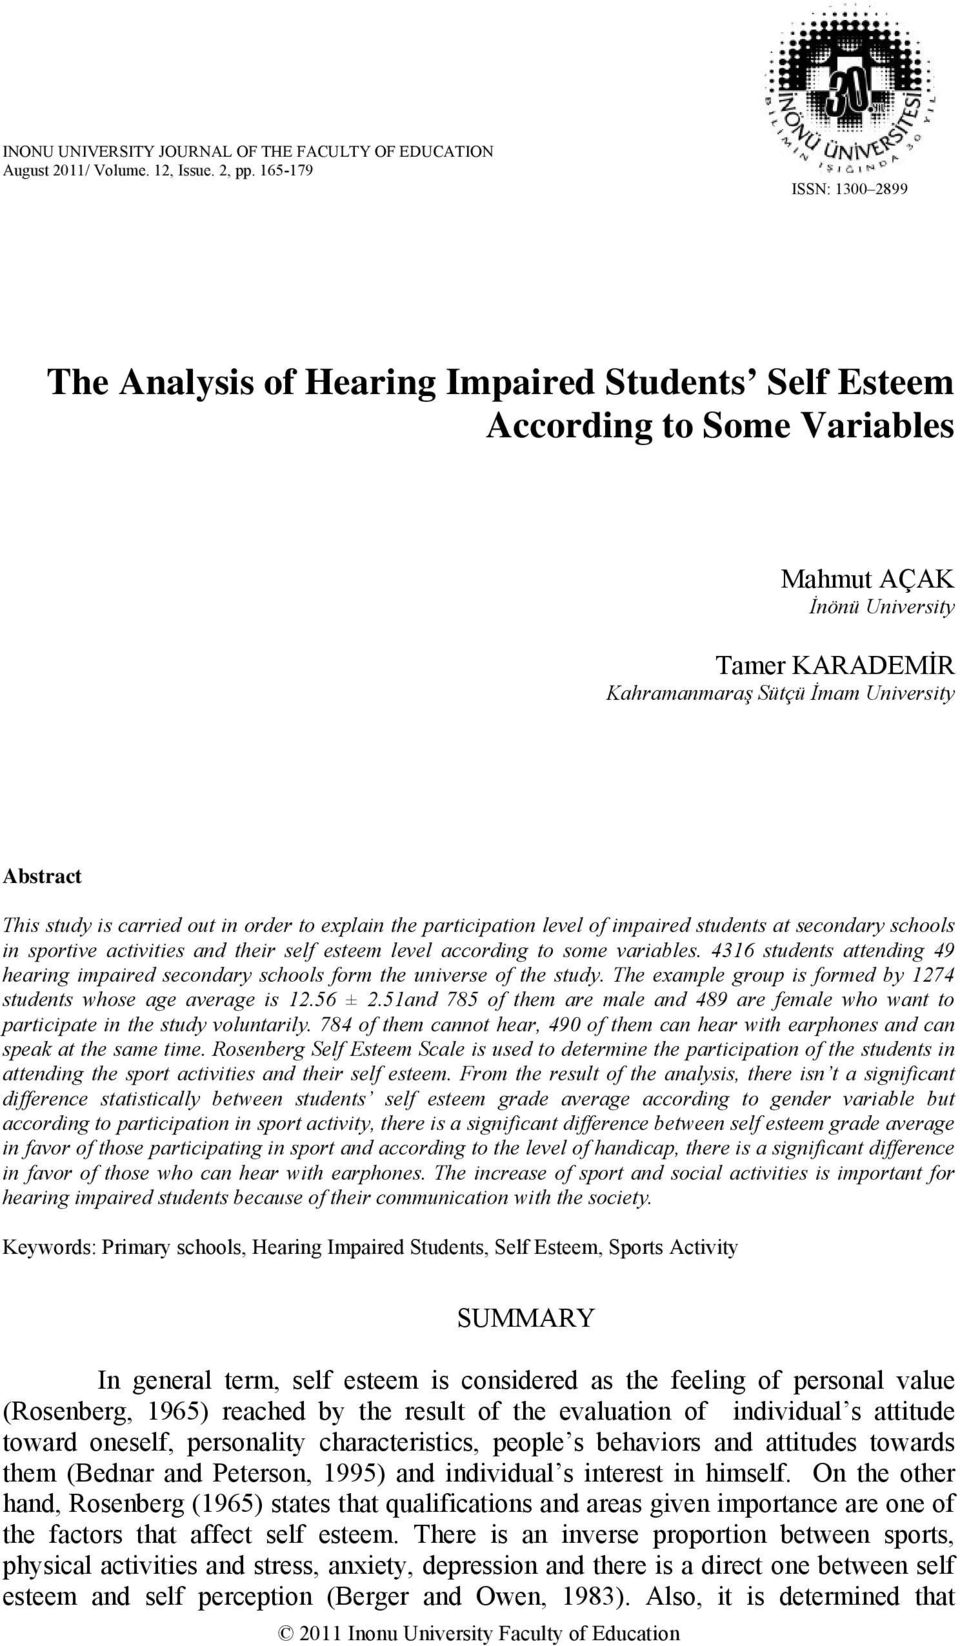 This study is carried out in order to explain the participation level of impaired students at secondary schools in sportive activities and their self esteem level according to some variables.